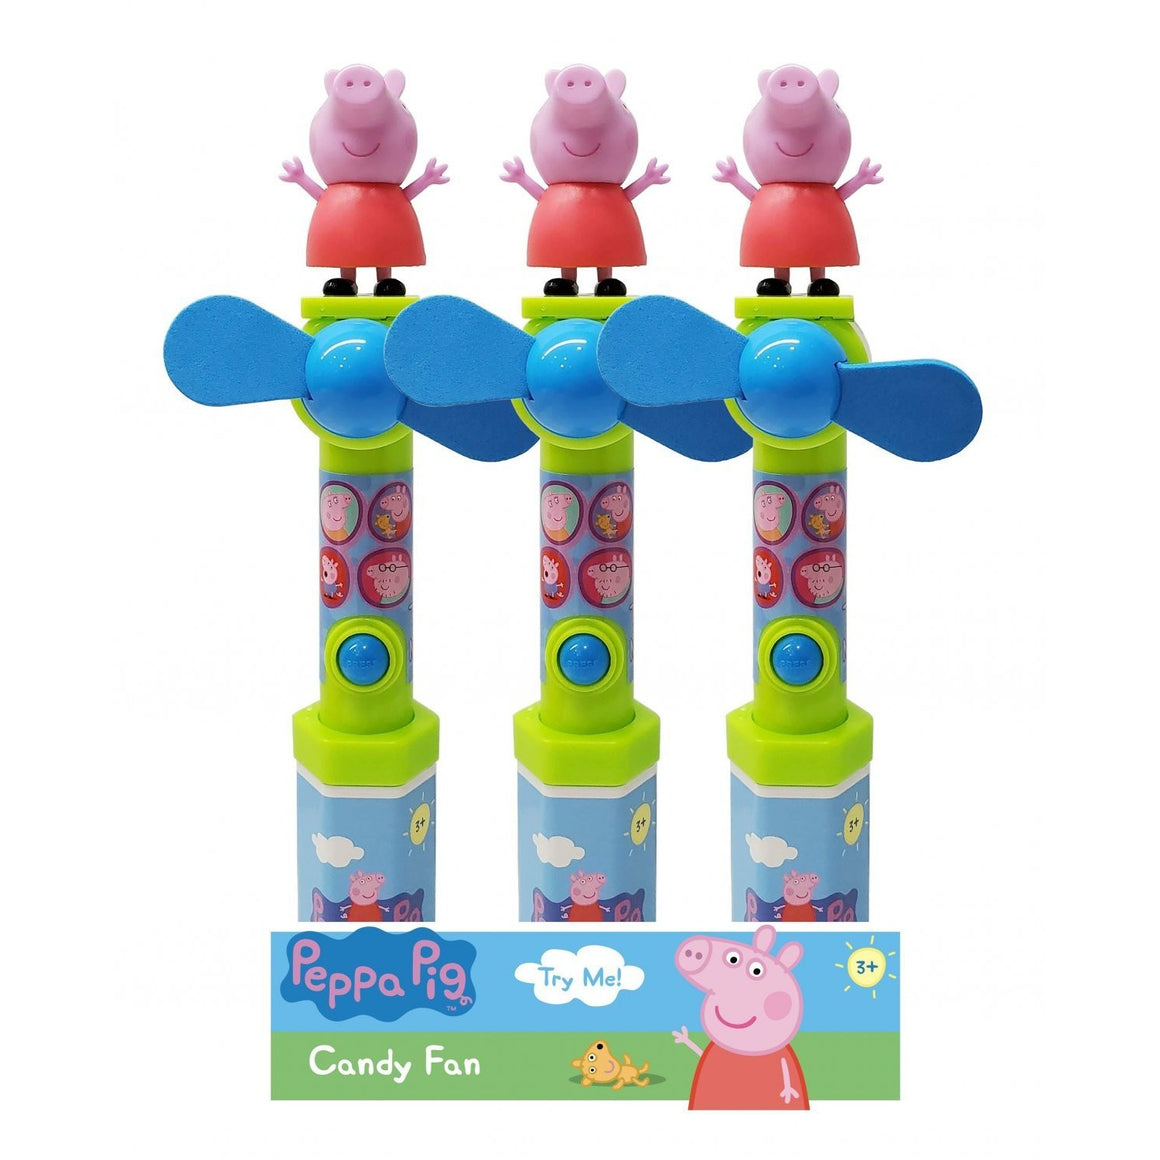 Peppa Pig Character Fan Candy Toy